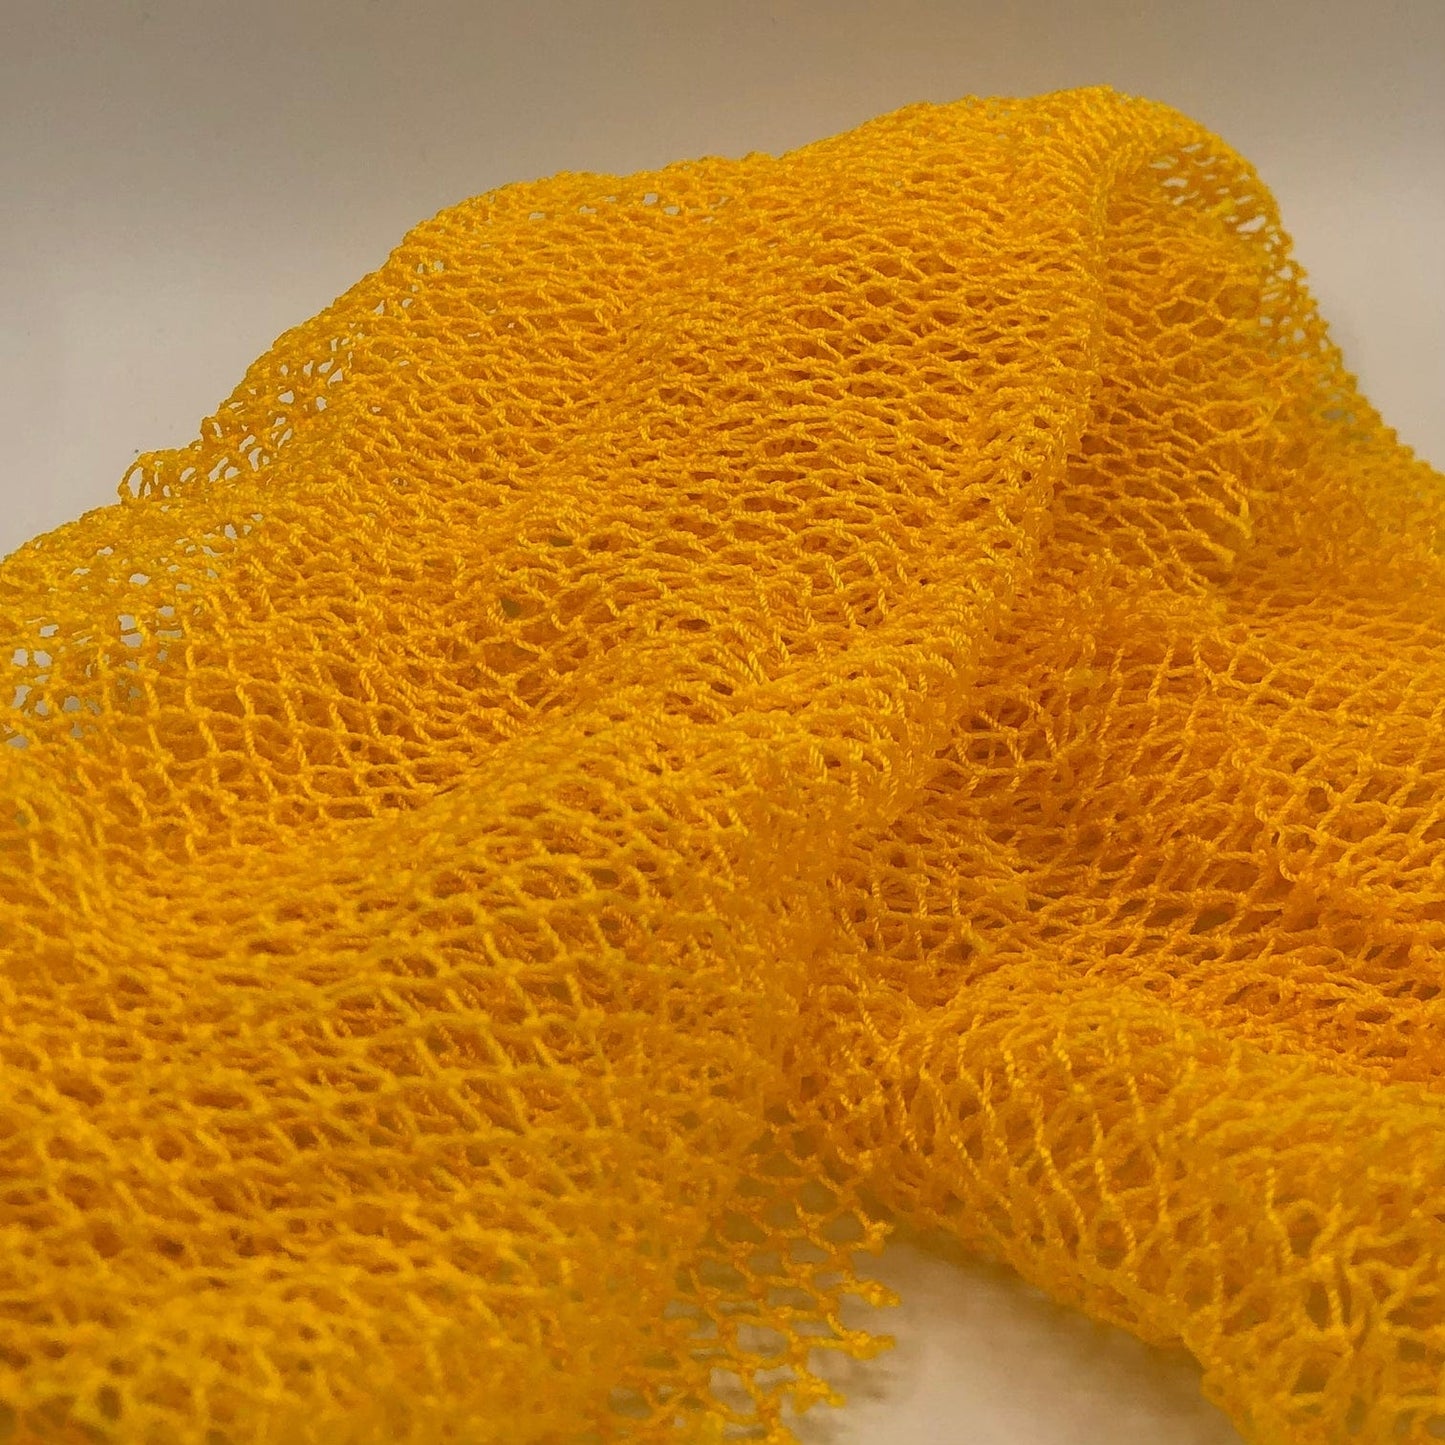 Body Buff African Bath Net. African bath sponge to exfoliate and soften skin. use nylon African bath net sponge to smooth skin. helps with keratosis pillars and strawberry legs.